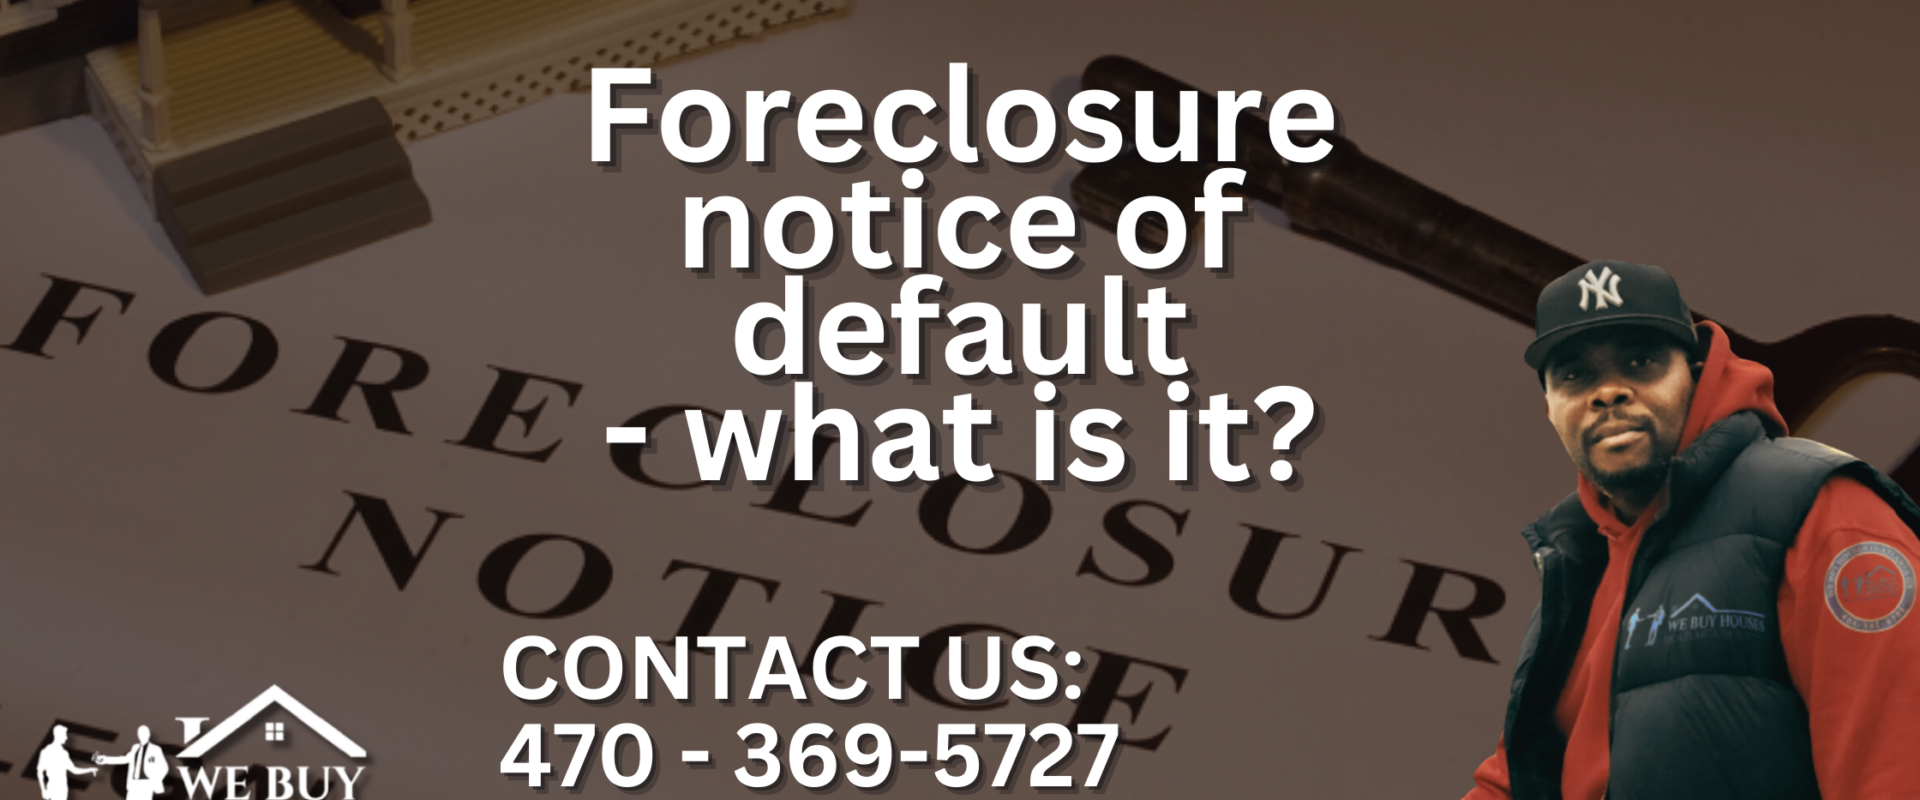 Foreclosure-notice-of-default-what-is-it